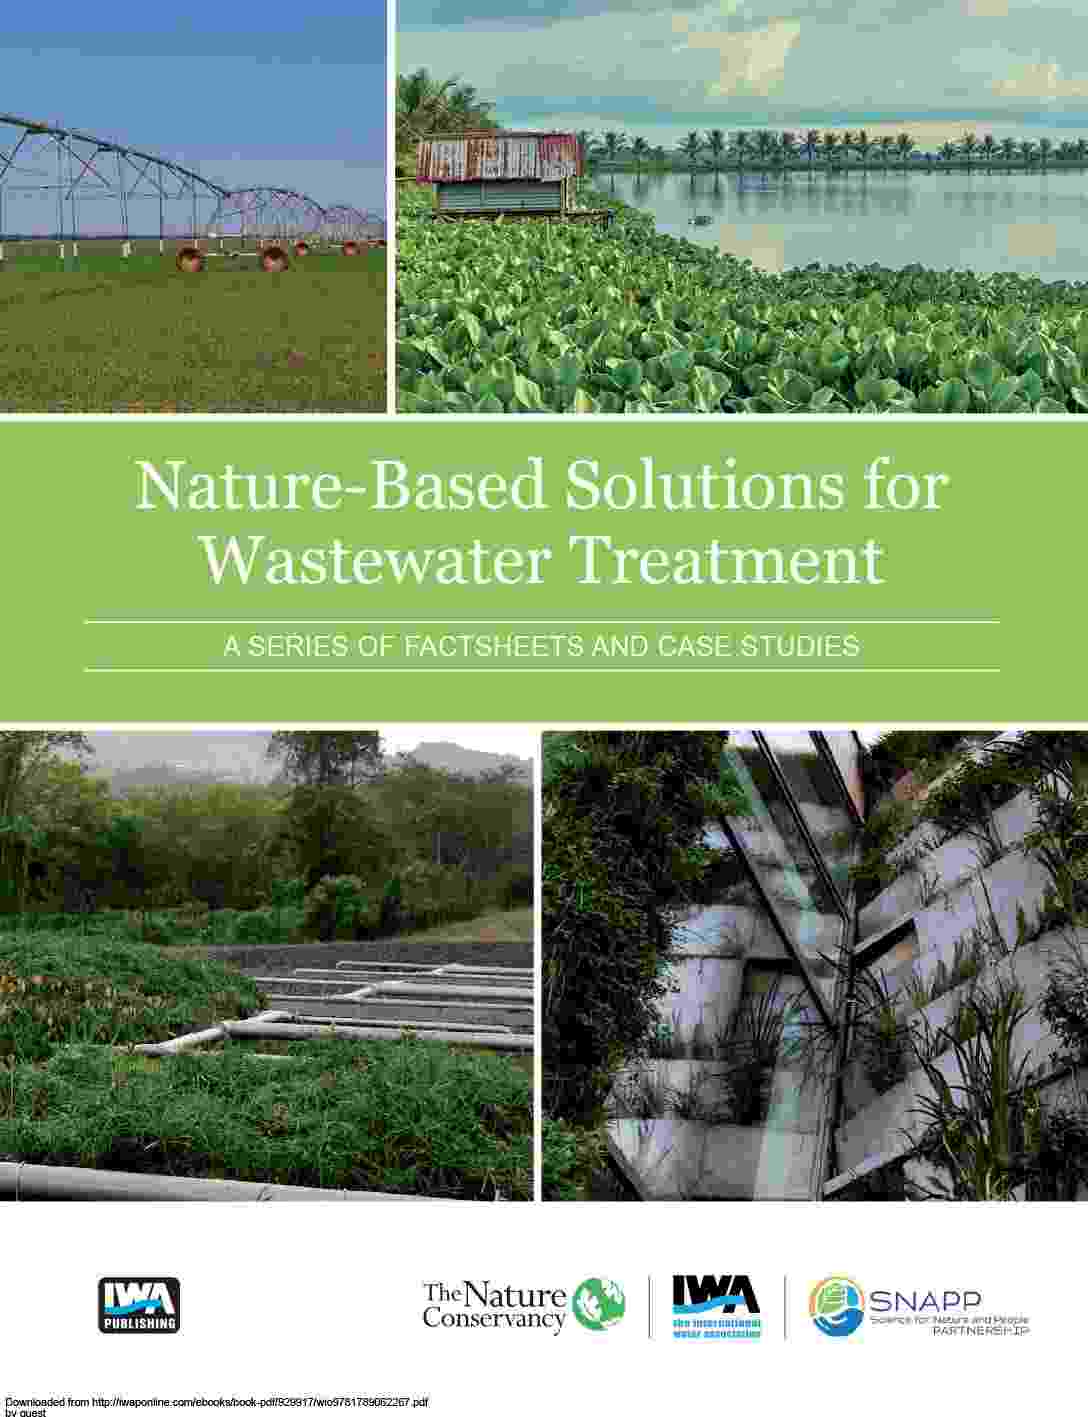 Cover image for Nature-based Solutions for Wastewater Treatment ebook, showing images of irrigation methods, water treatment ponds, and other nature-based water treatment solutions.